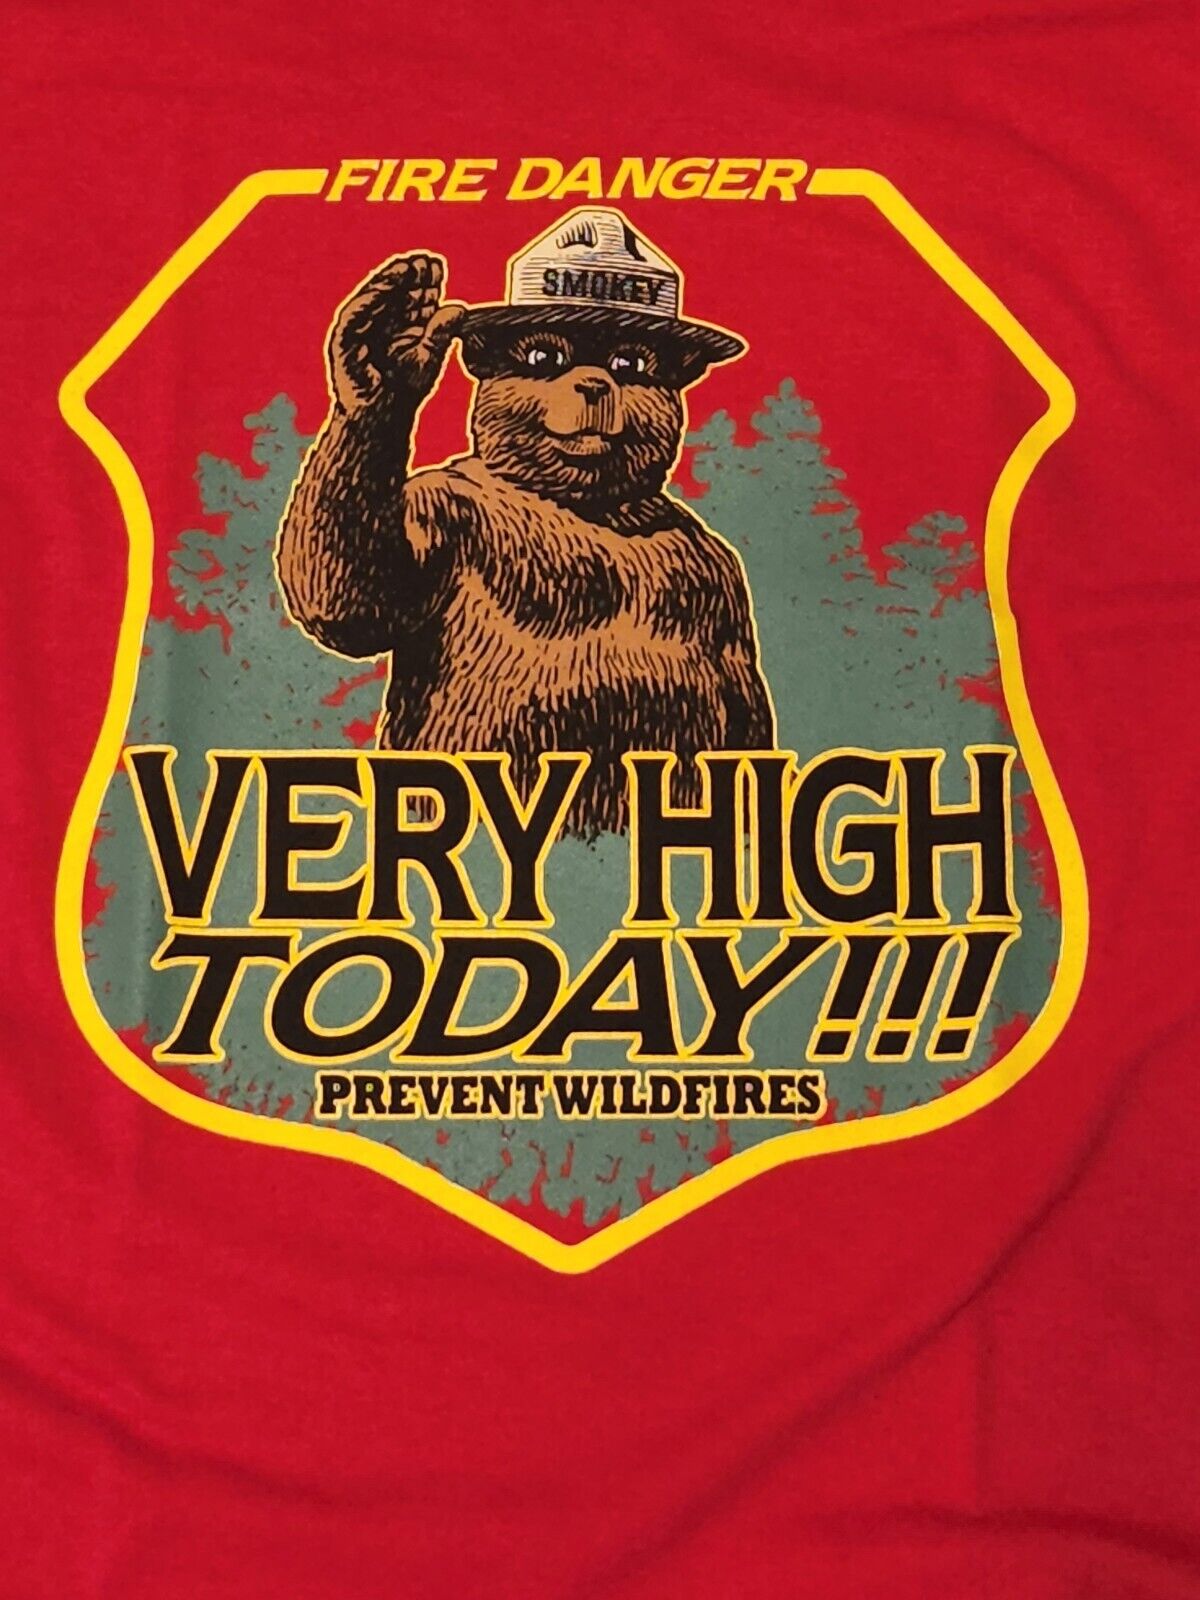 Smokey the Bear Sleeveless T-Shirt - Fire Danger Very High Today Prevent Wildfires - Red Tank Top